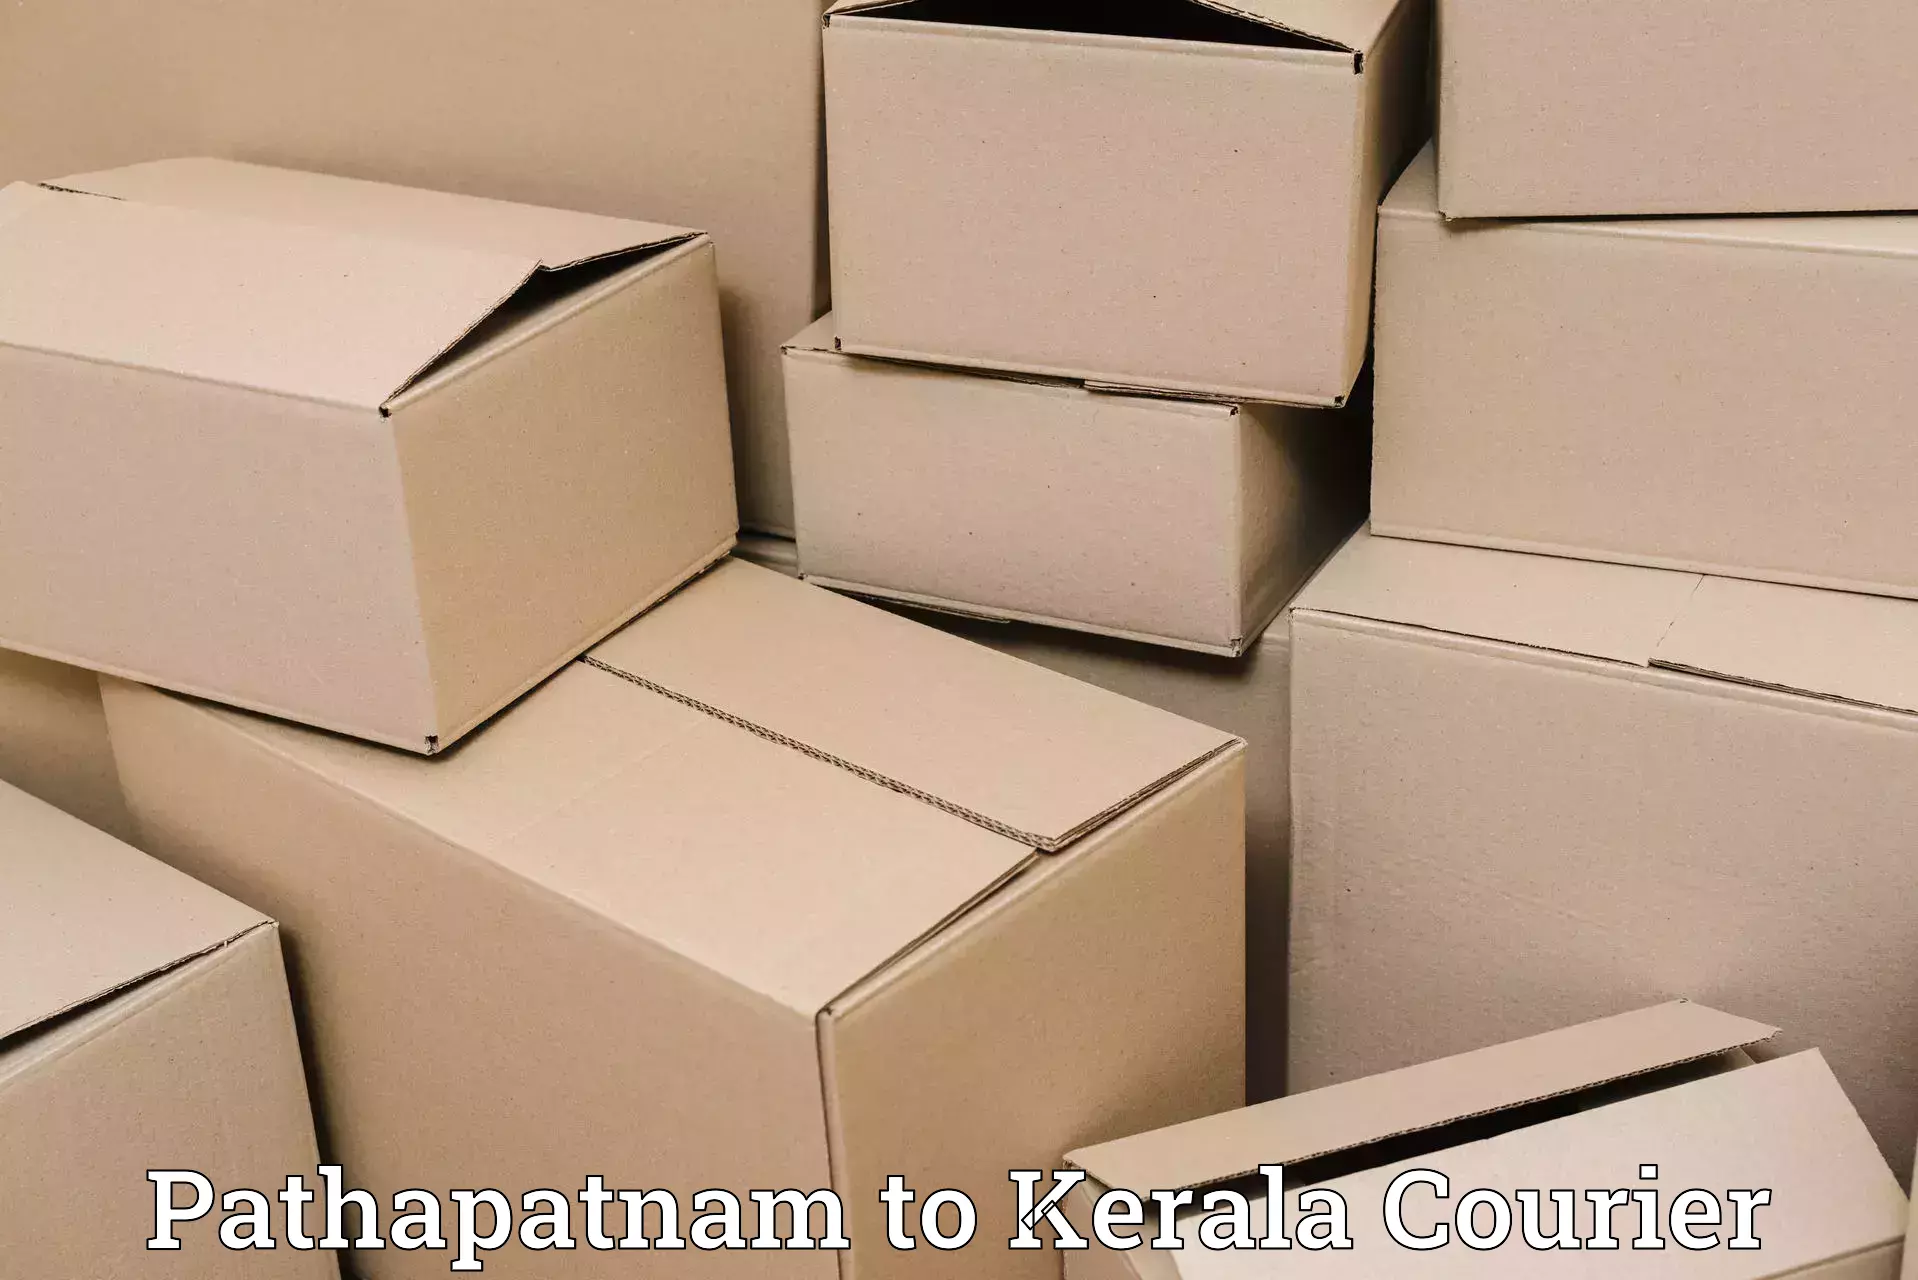 Affordable logistics services Pathapatnam to Cochin Port Kochi